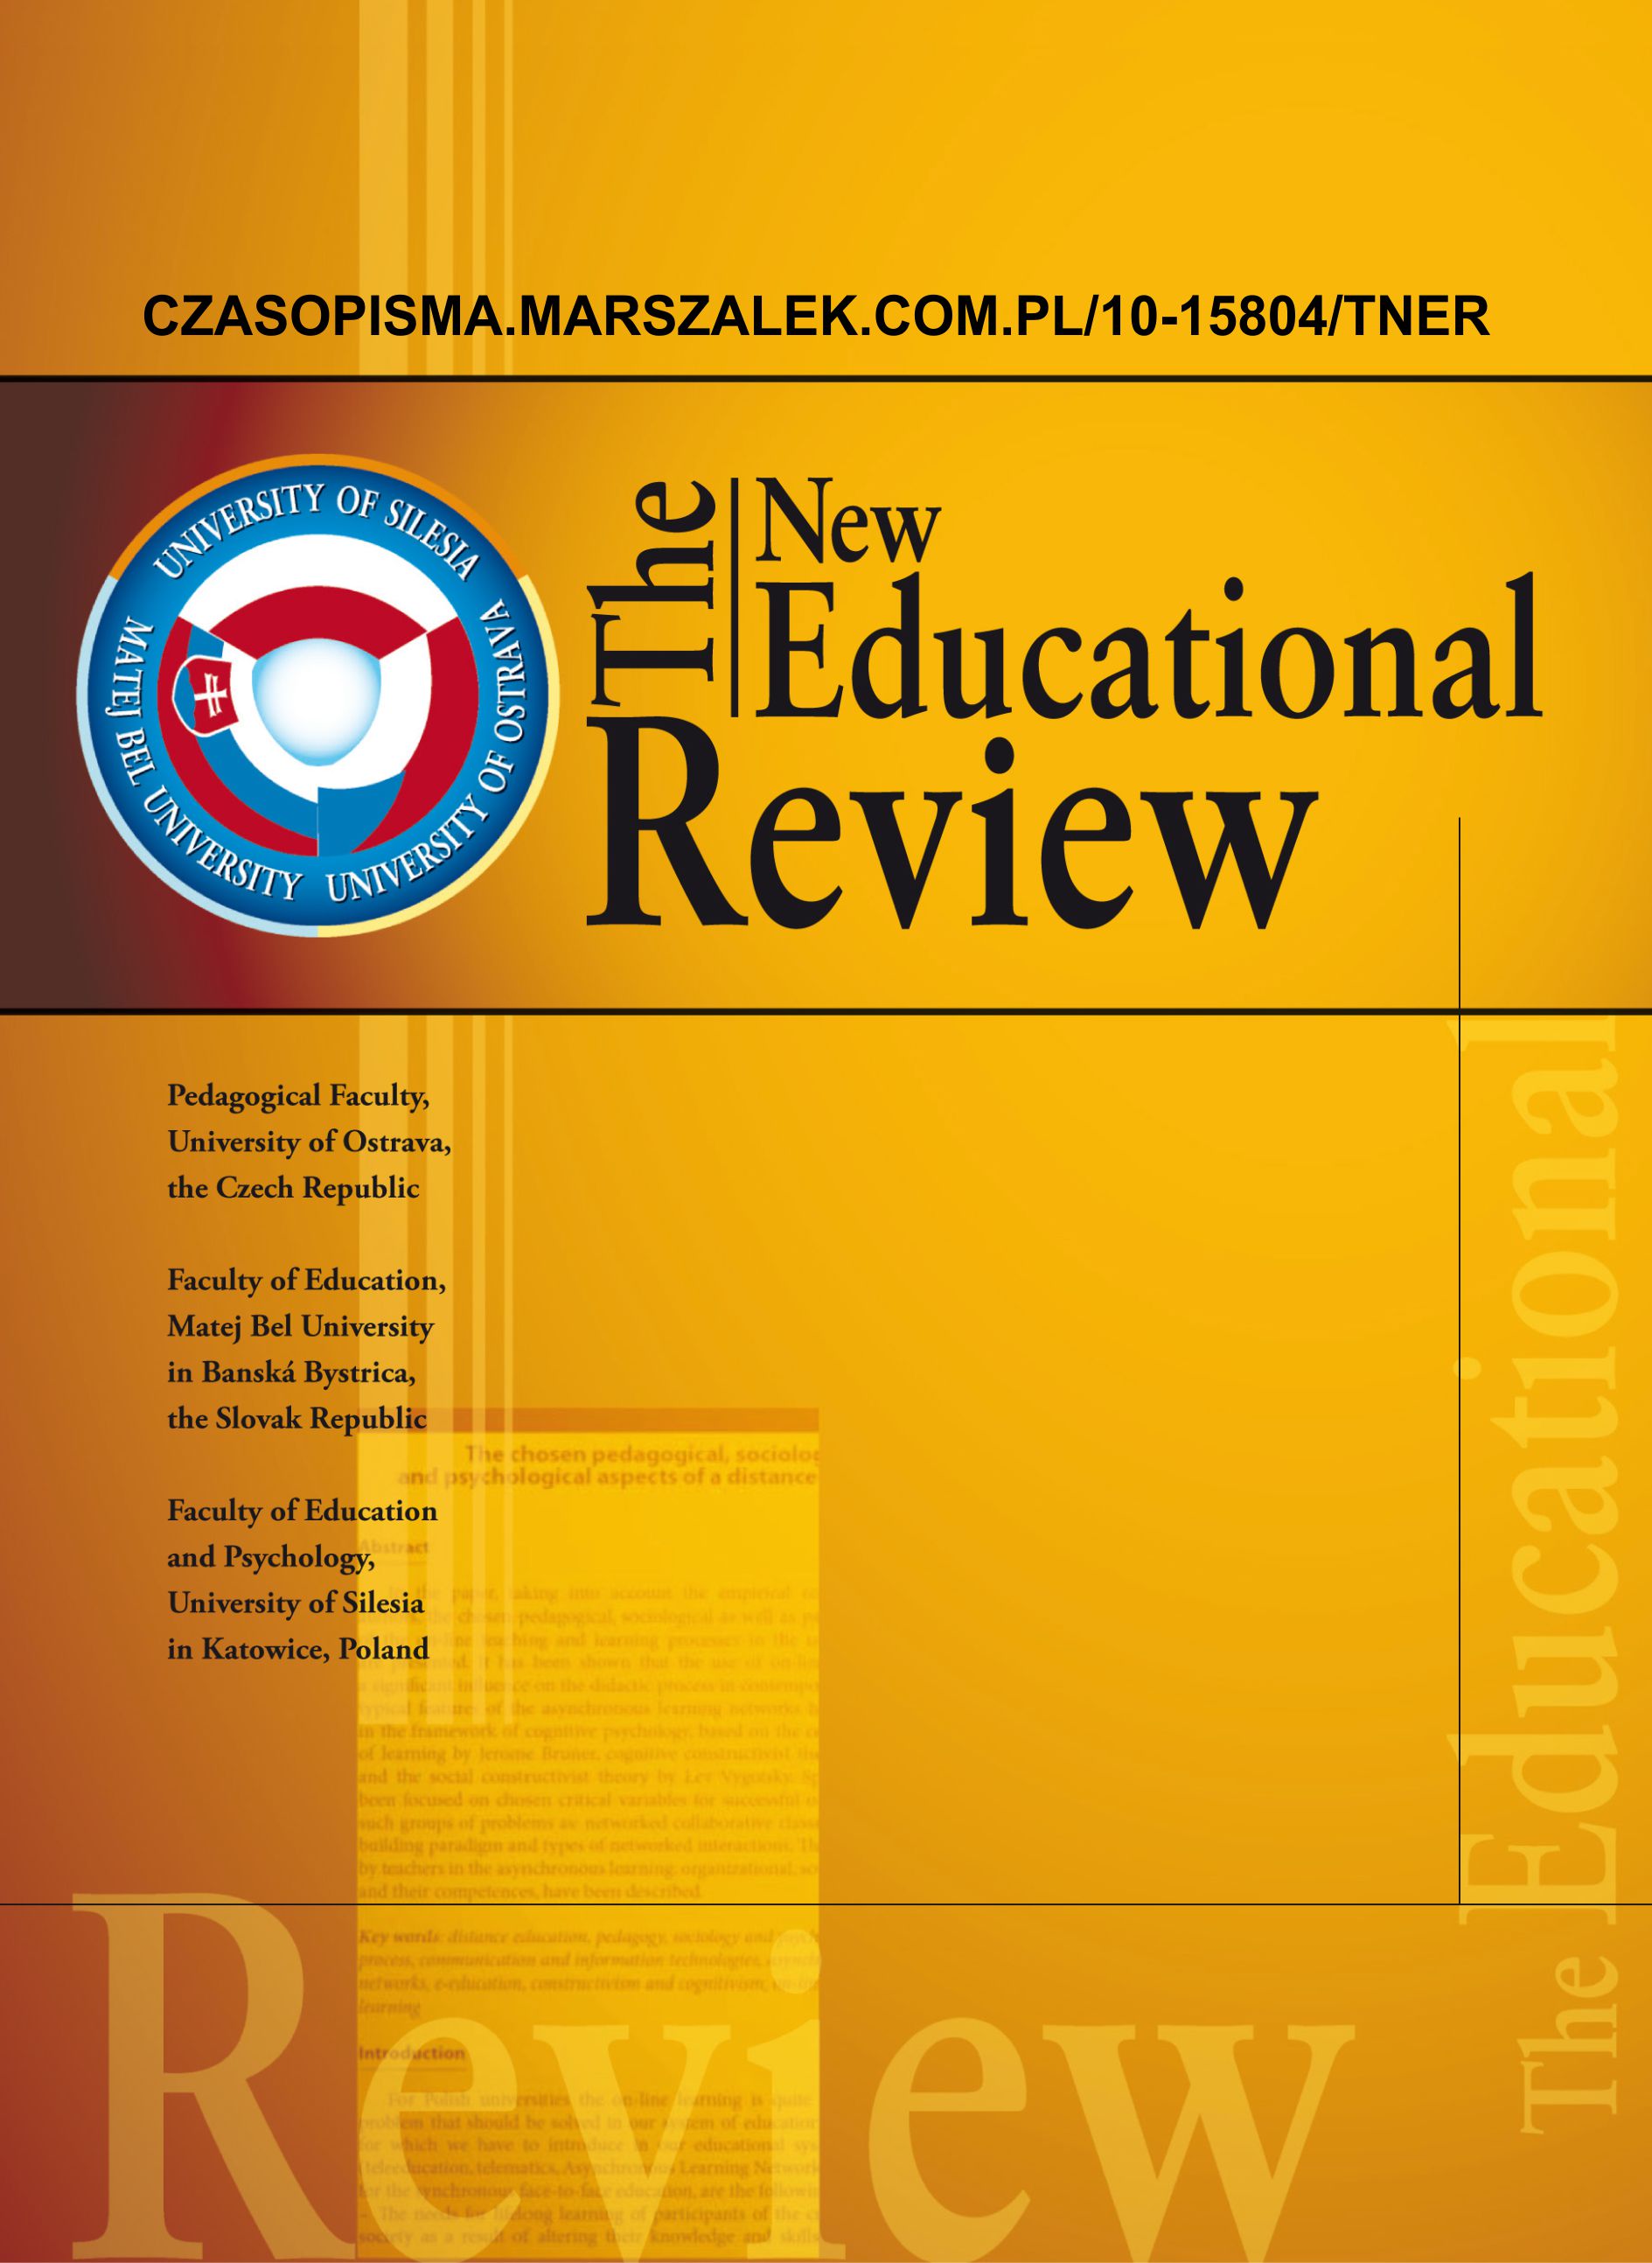 Inventory for Measuring Higher-Order Thinking Learning Environment Cover Image